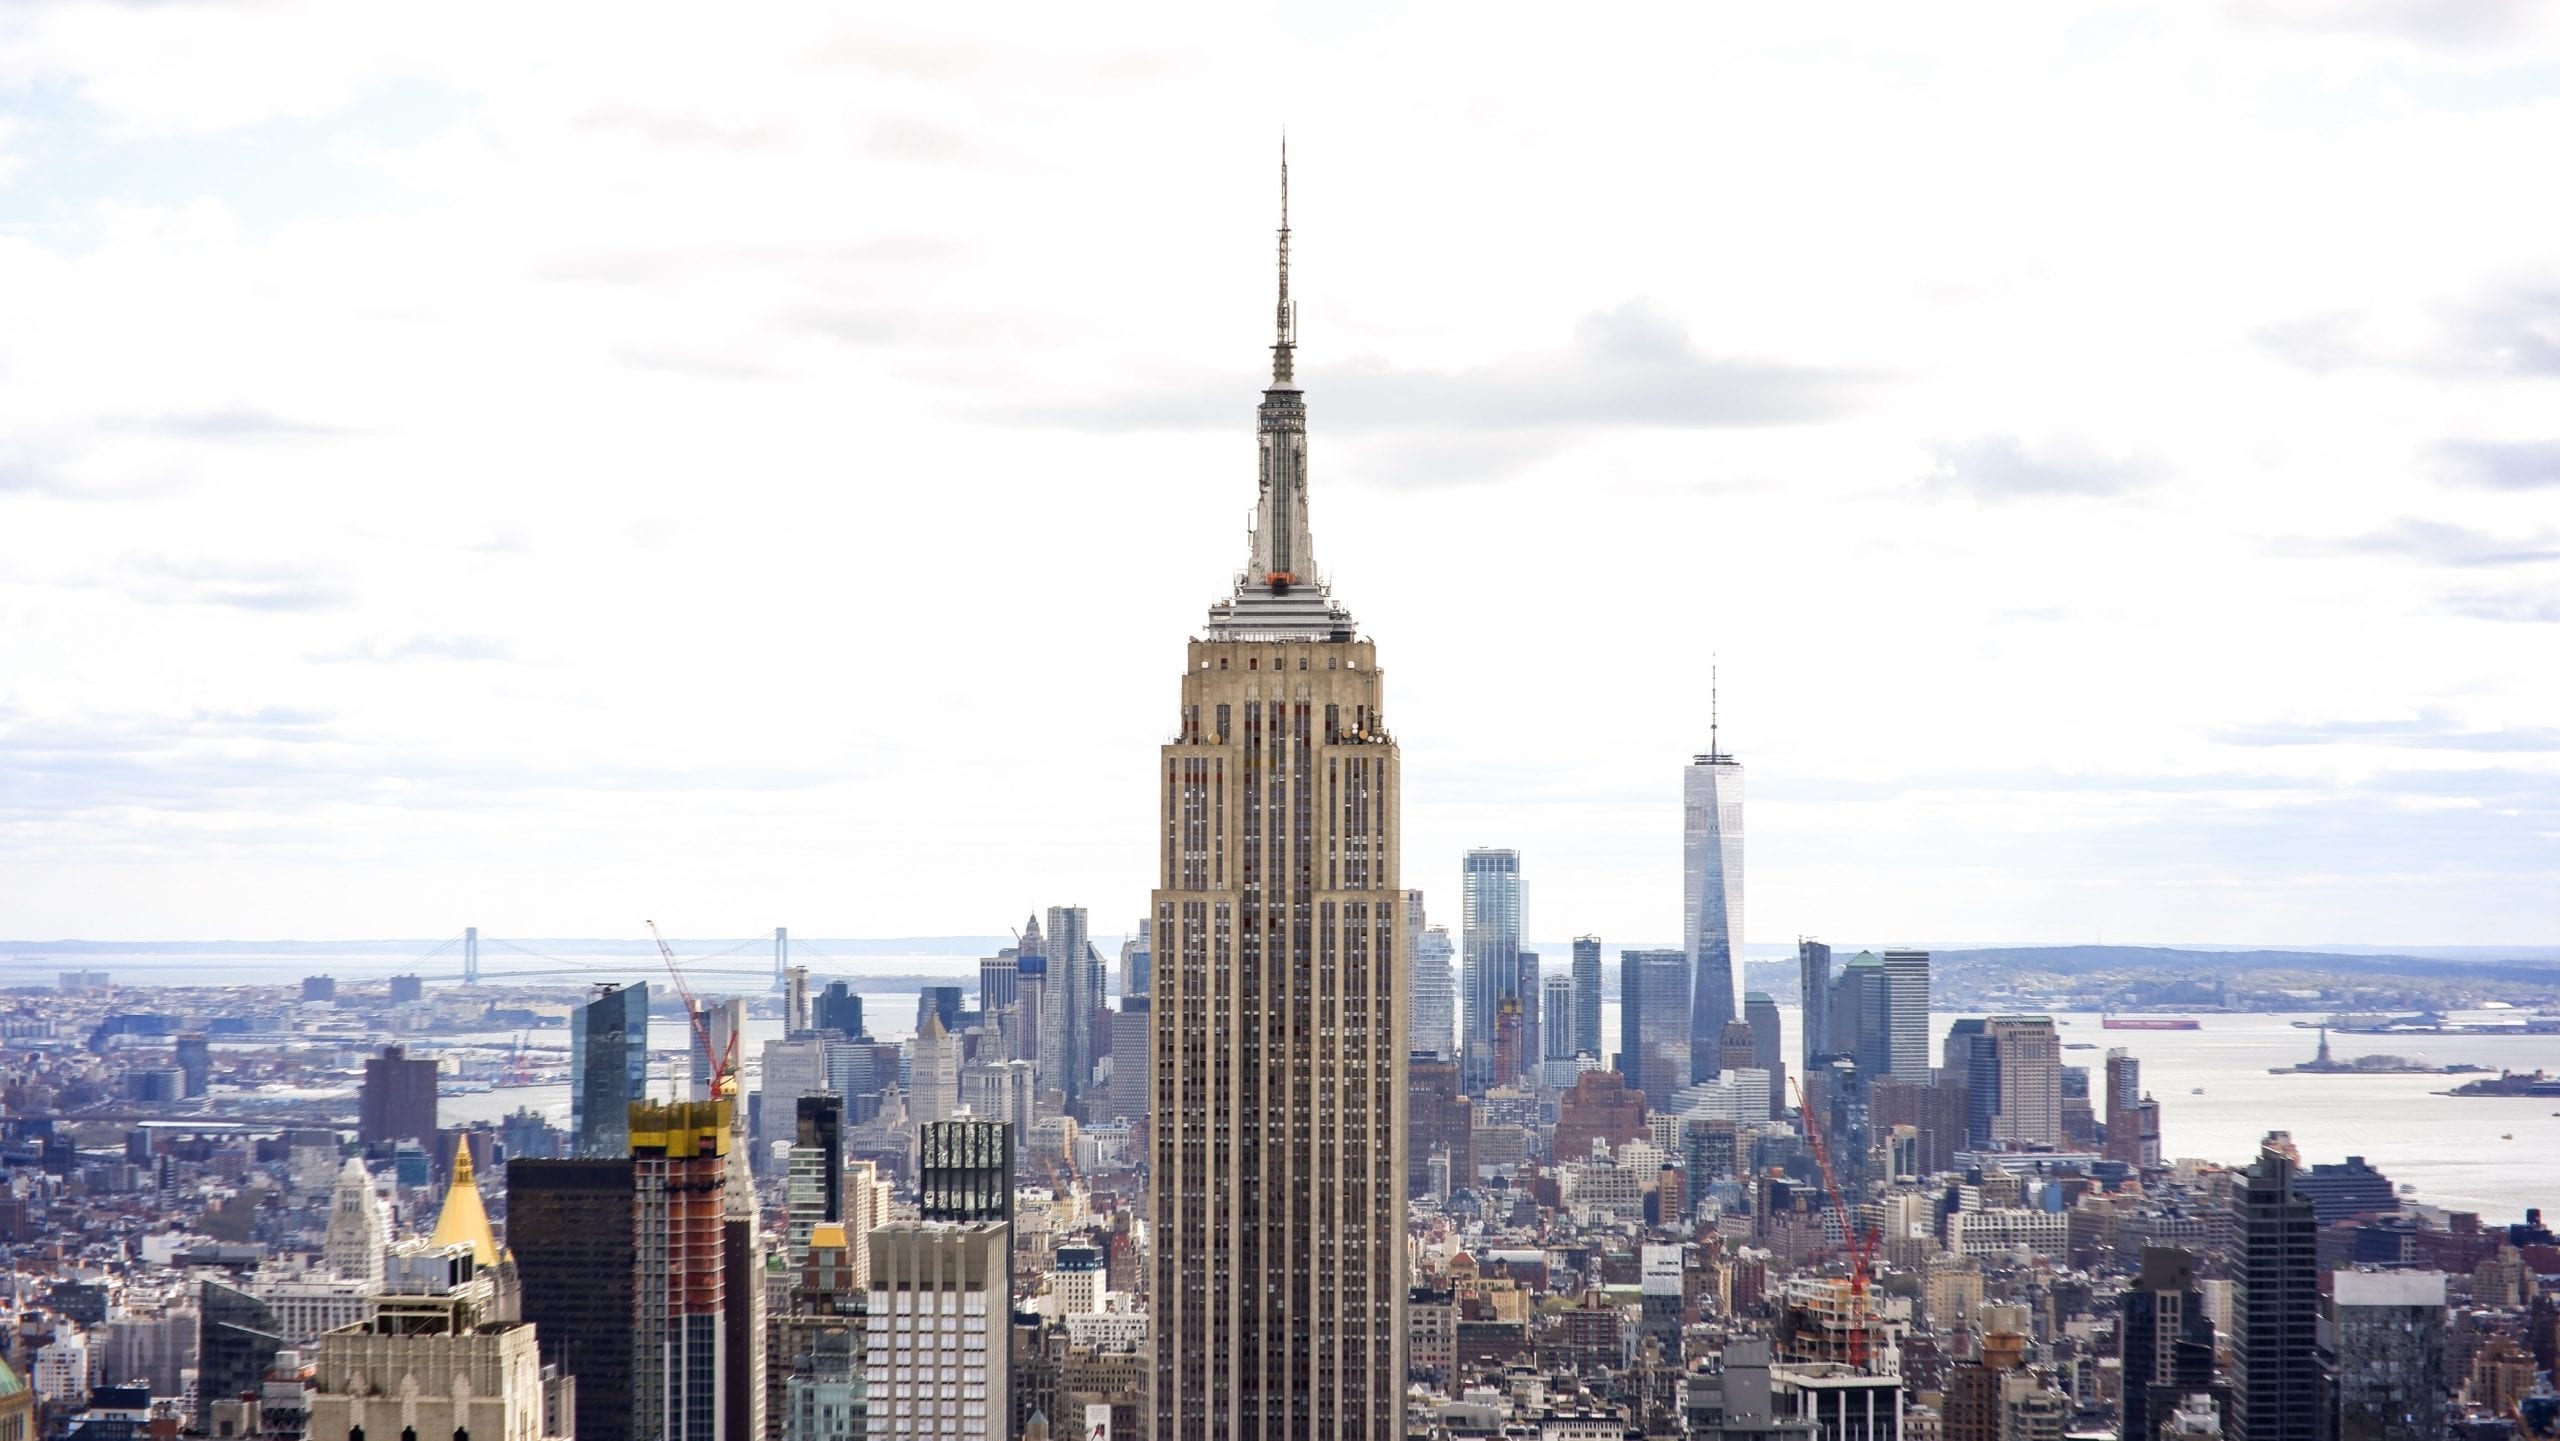 facts about the empire state building